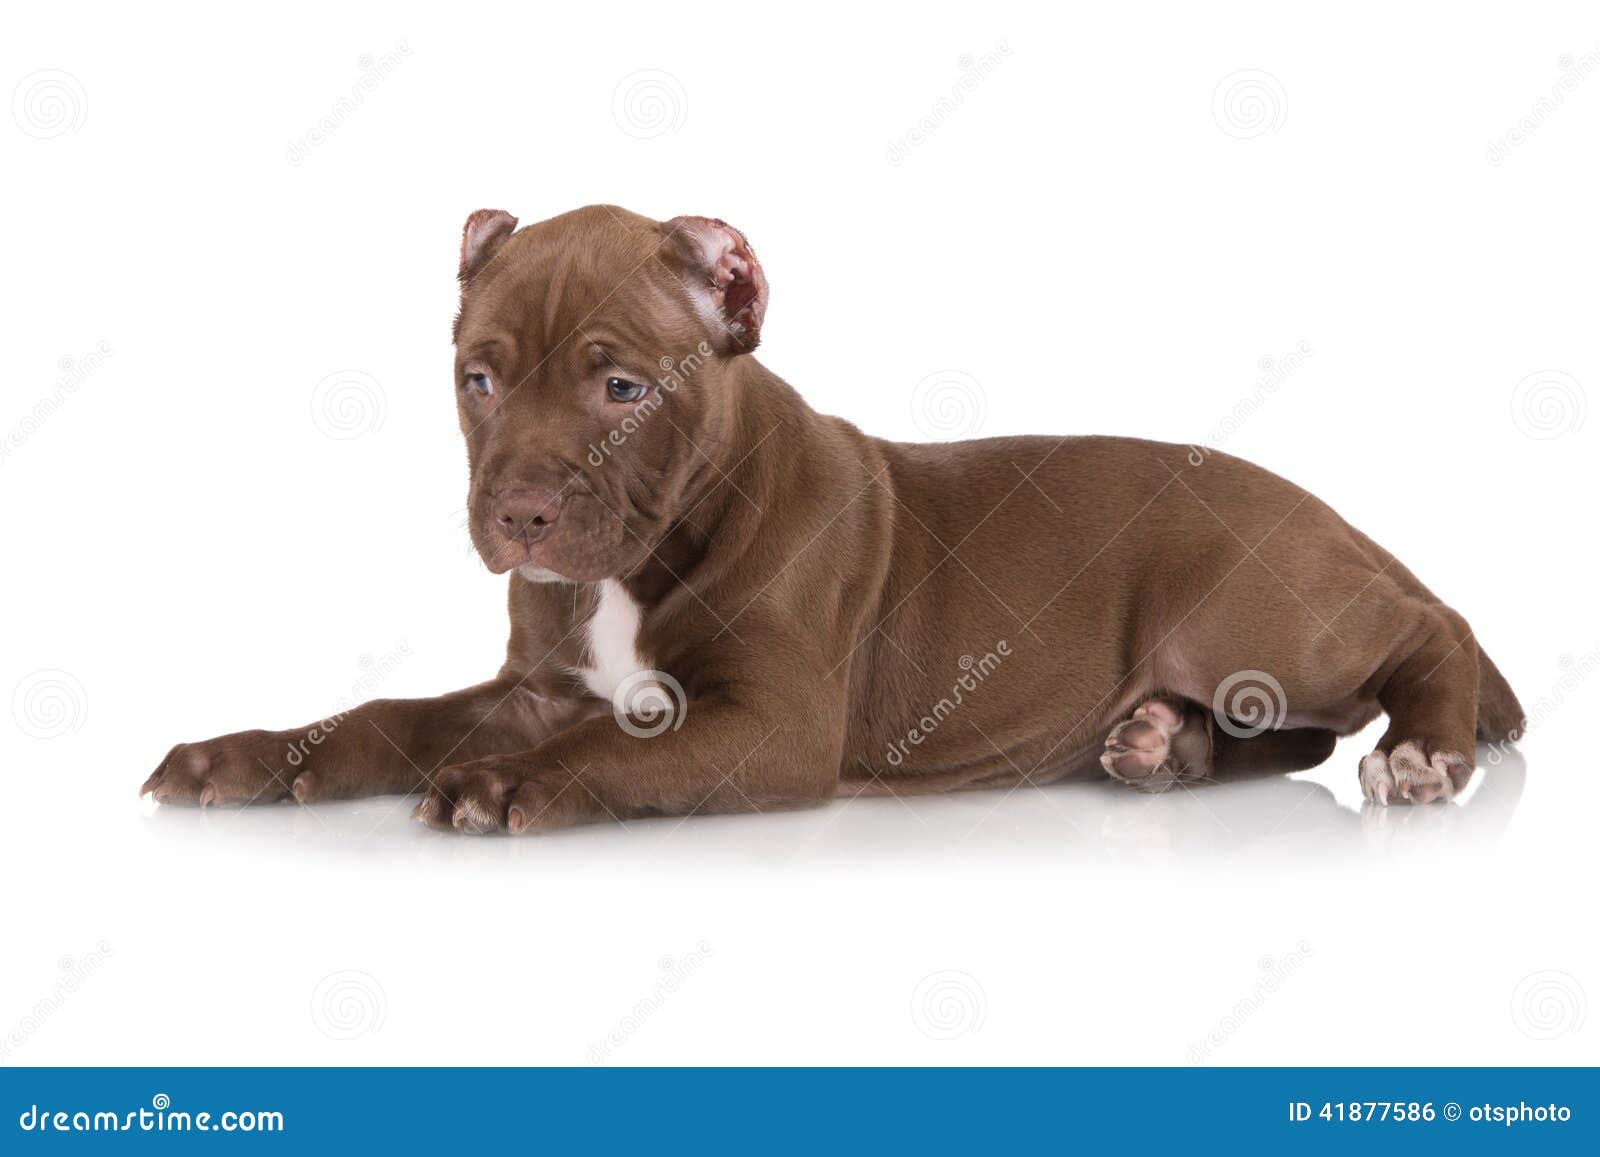 Adorable Chocolate Brown Pit Bull Puppy Stock Photo - Image: 41877586